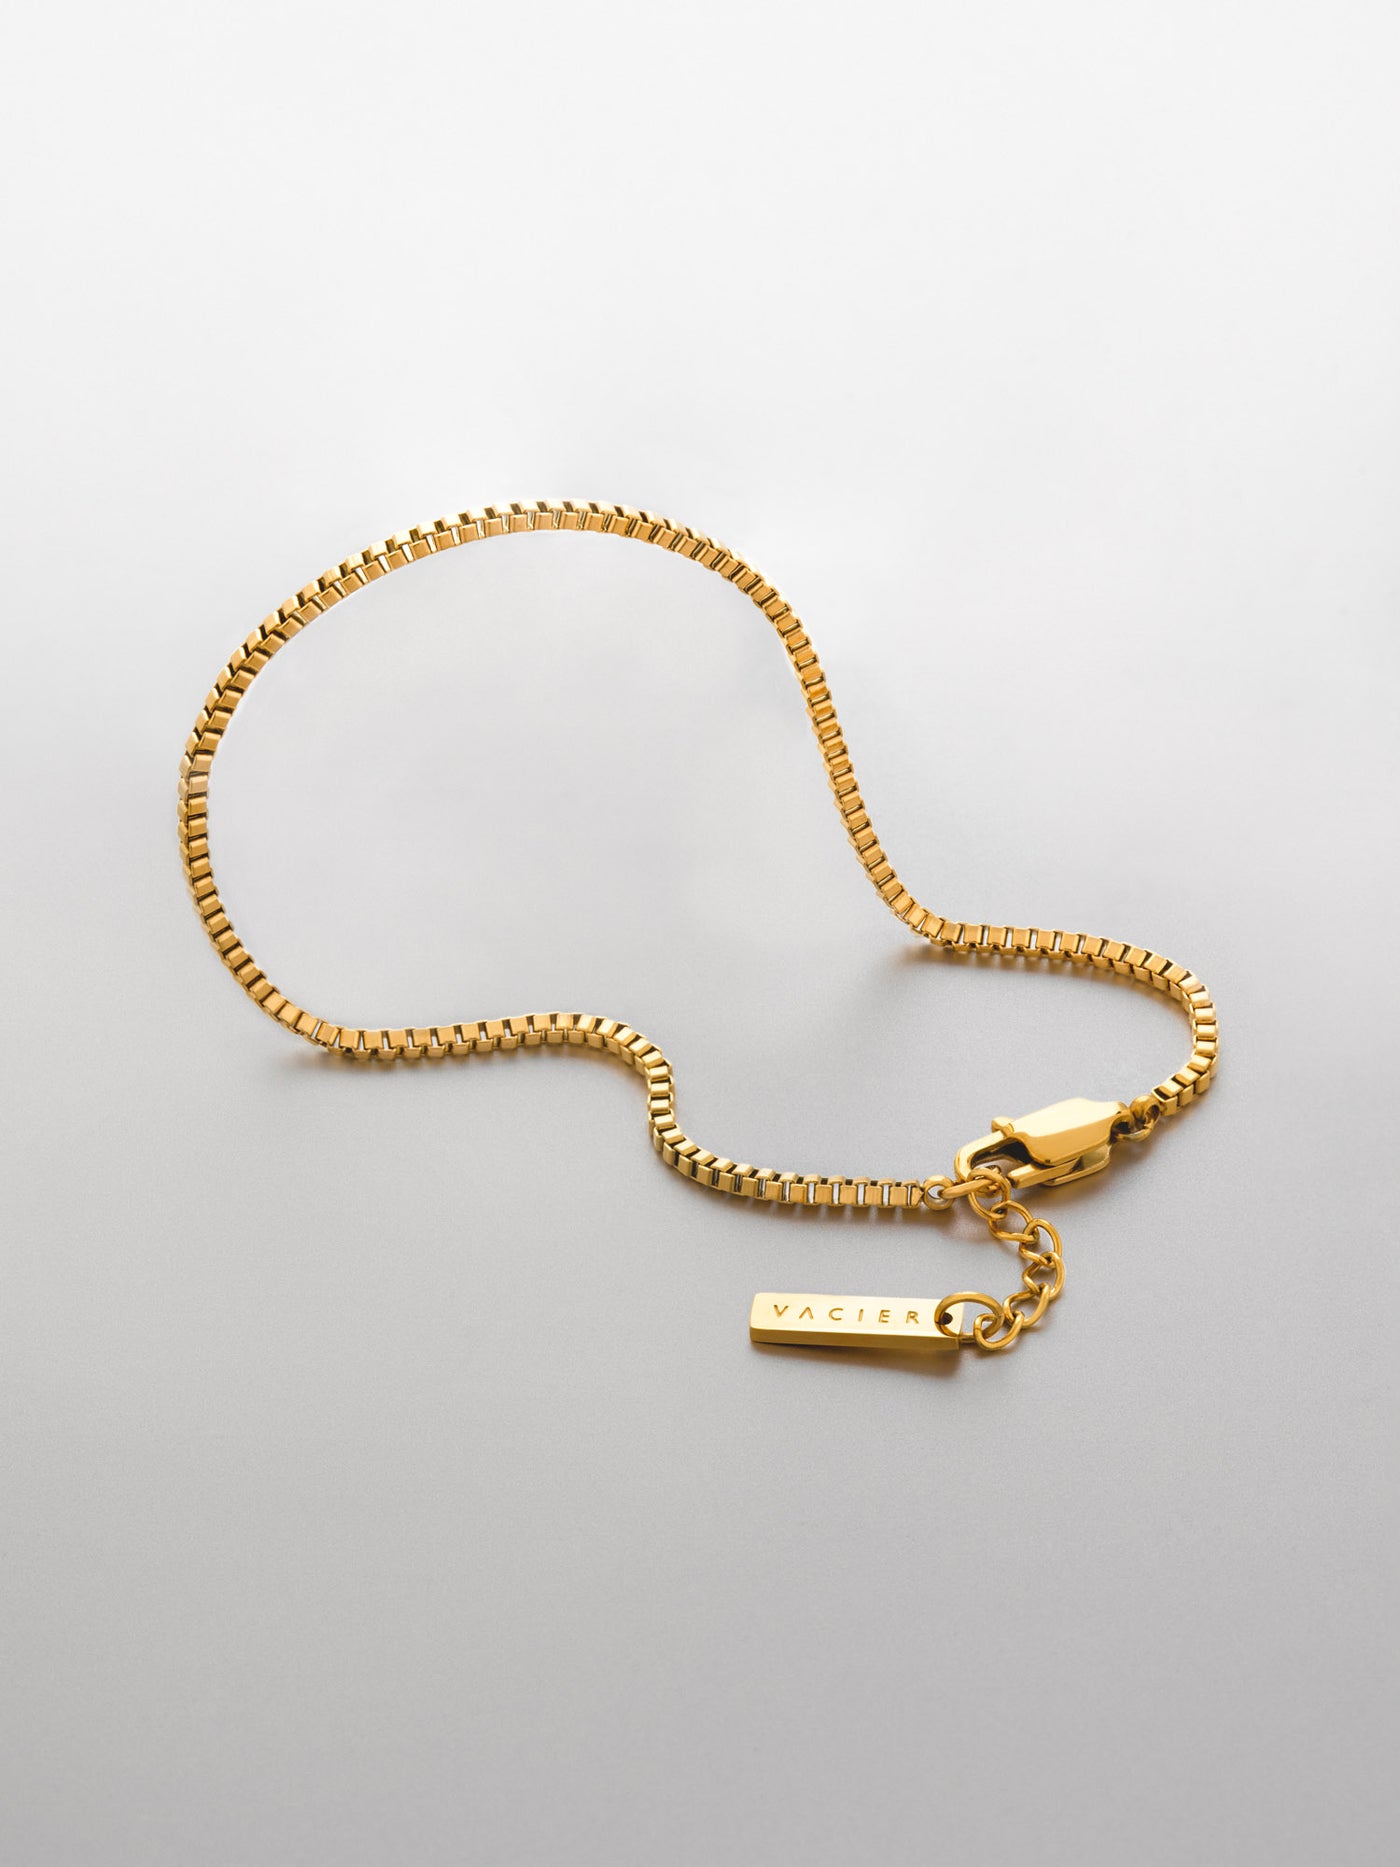 Amager | 8 mm Gold-Tone Cable Chain Necklace | In stock! | Lucleon | Cable  necklace, Leather corded necklace, Necklace